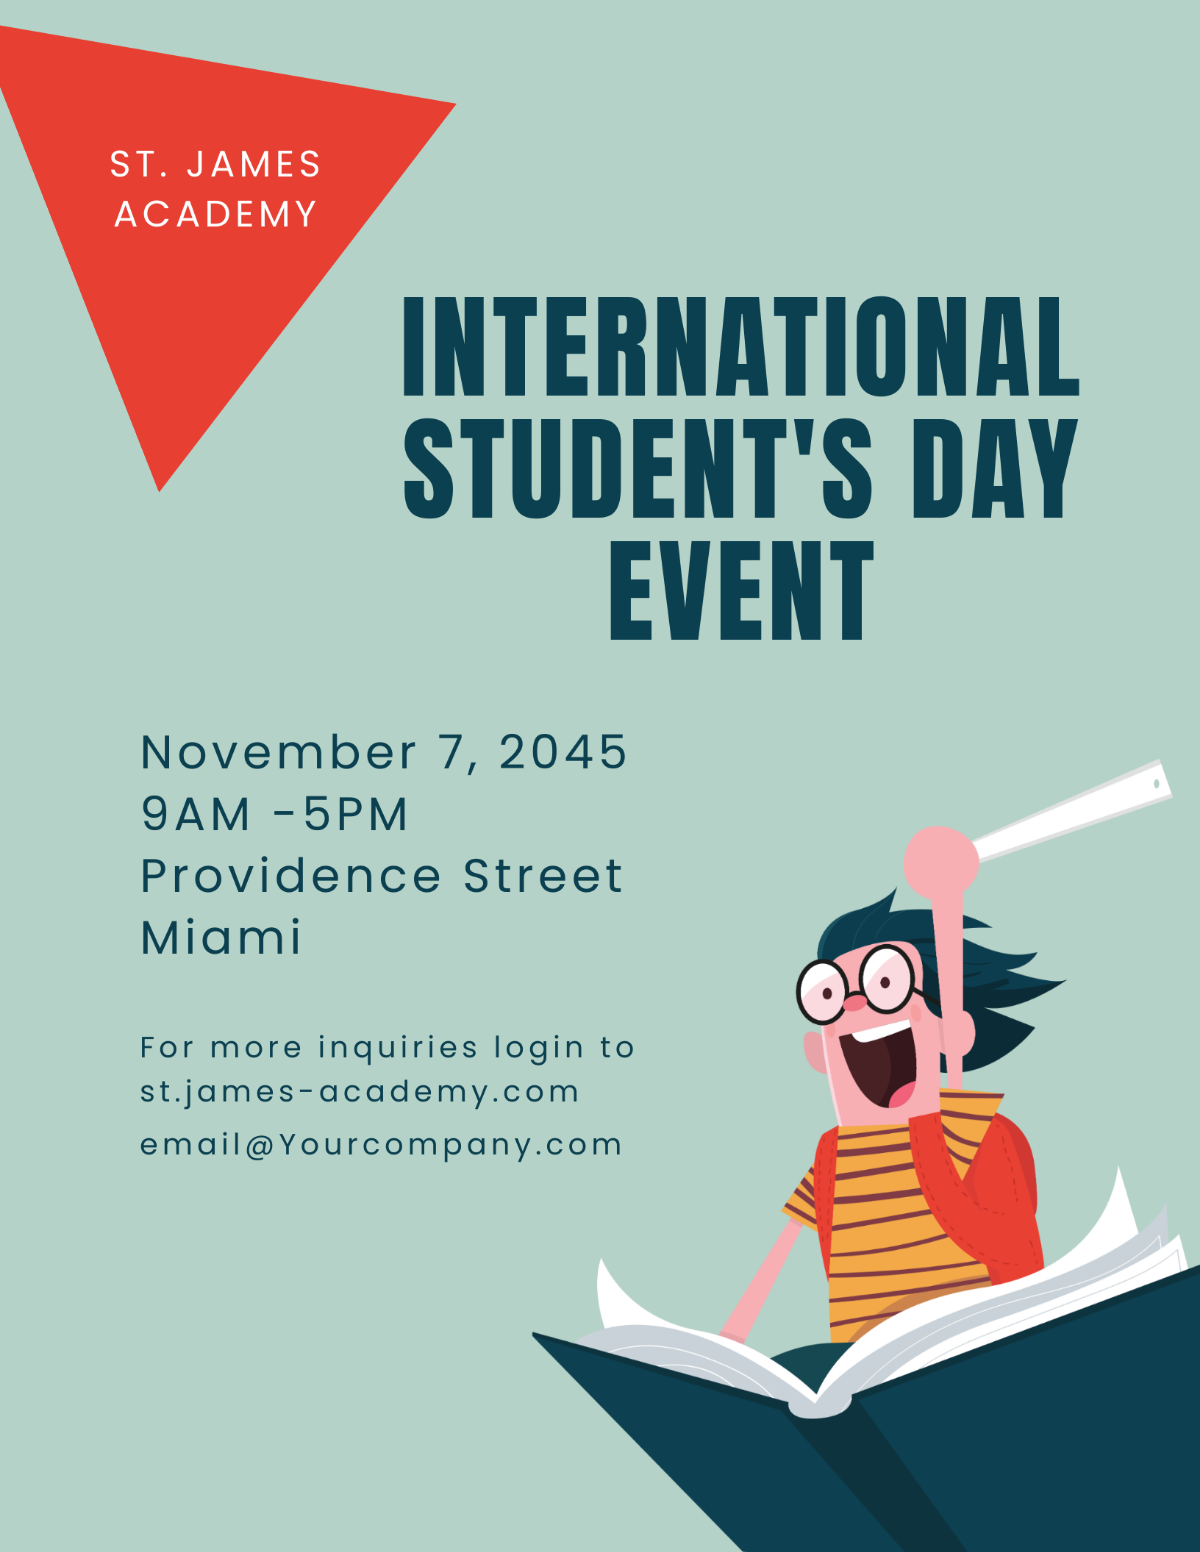 International Student's Day Flyer Template